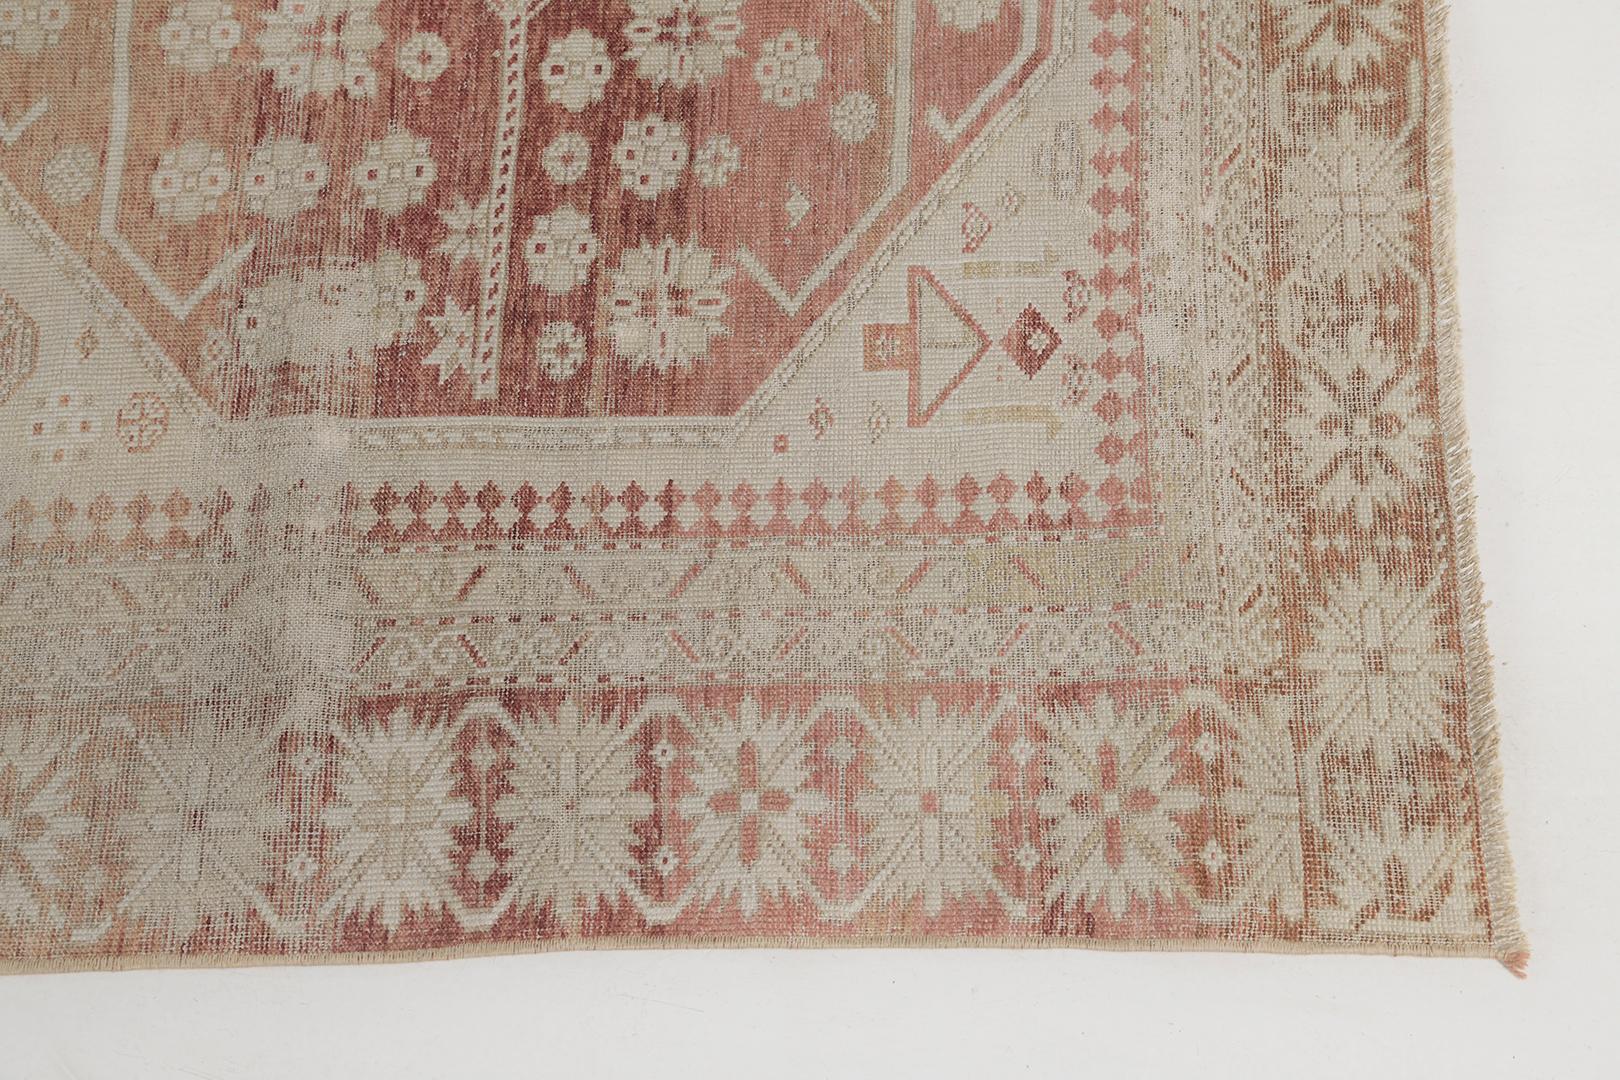 A compelling antique Caucasian Shirvan rug that features stunning geometric design reminiscent of windows gazing through the beguiling botanicals in the abrashed brick red field. Enclosed by the dainty floral border with the stunning evident age